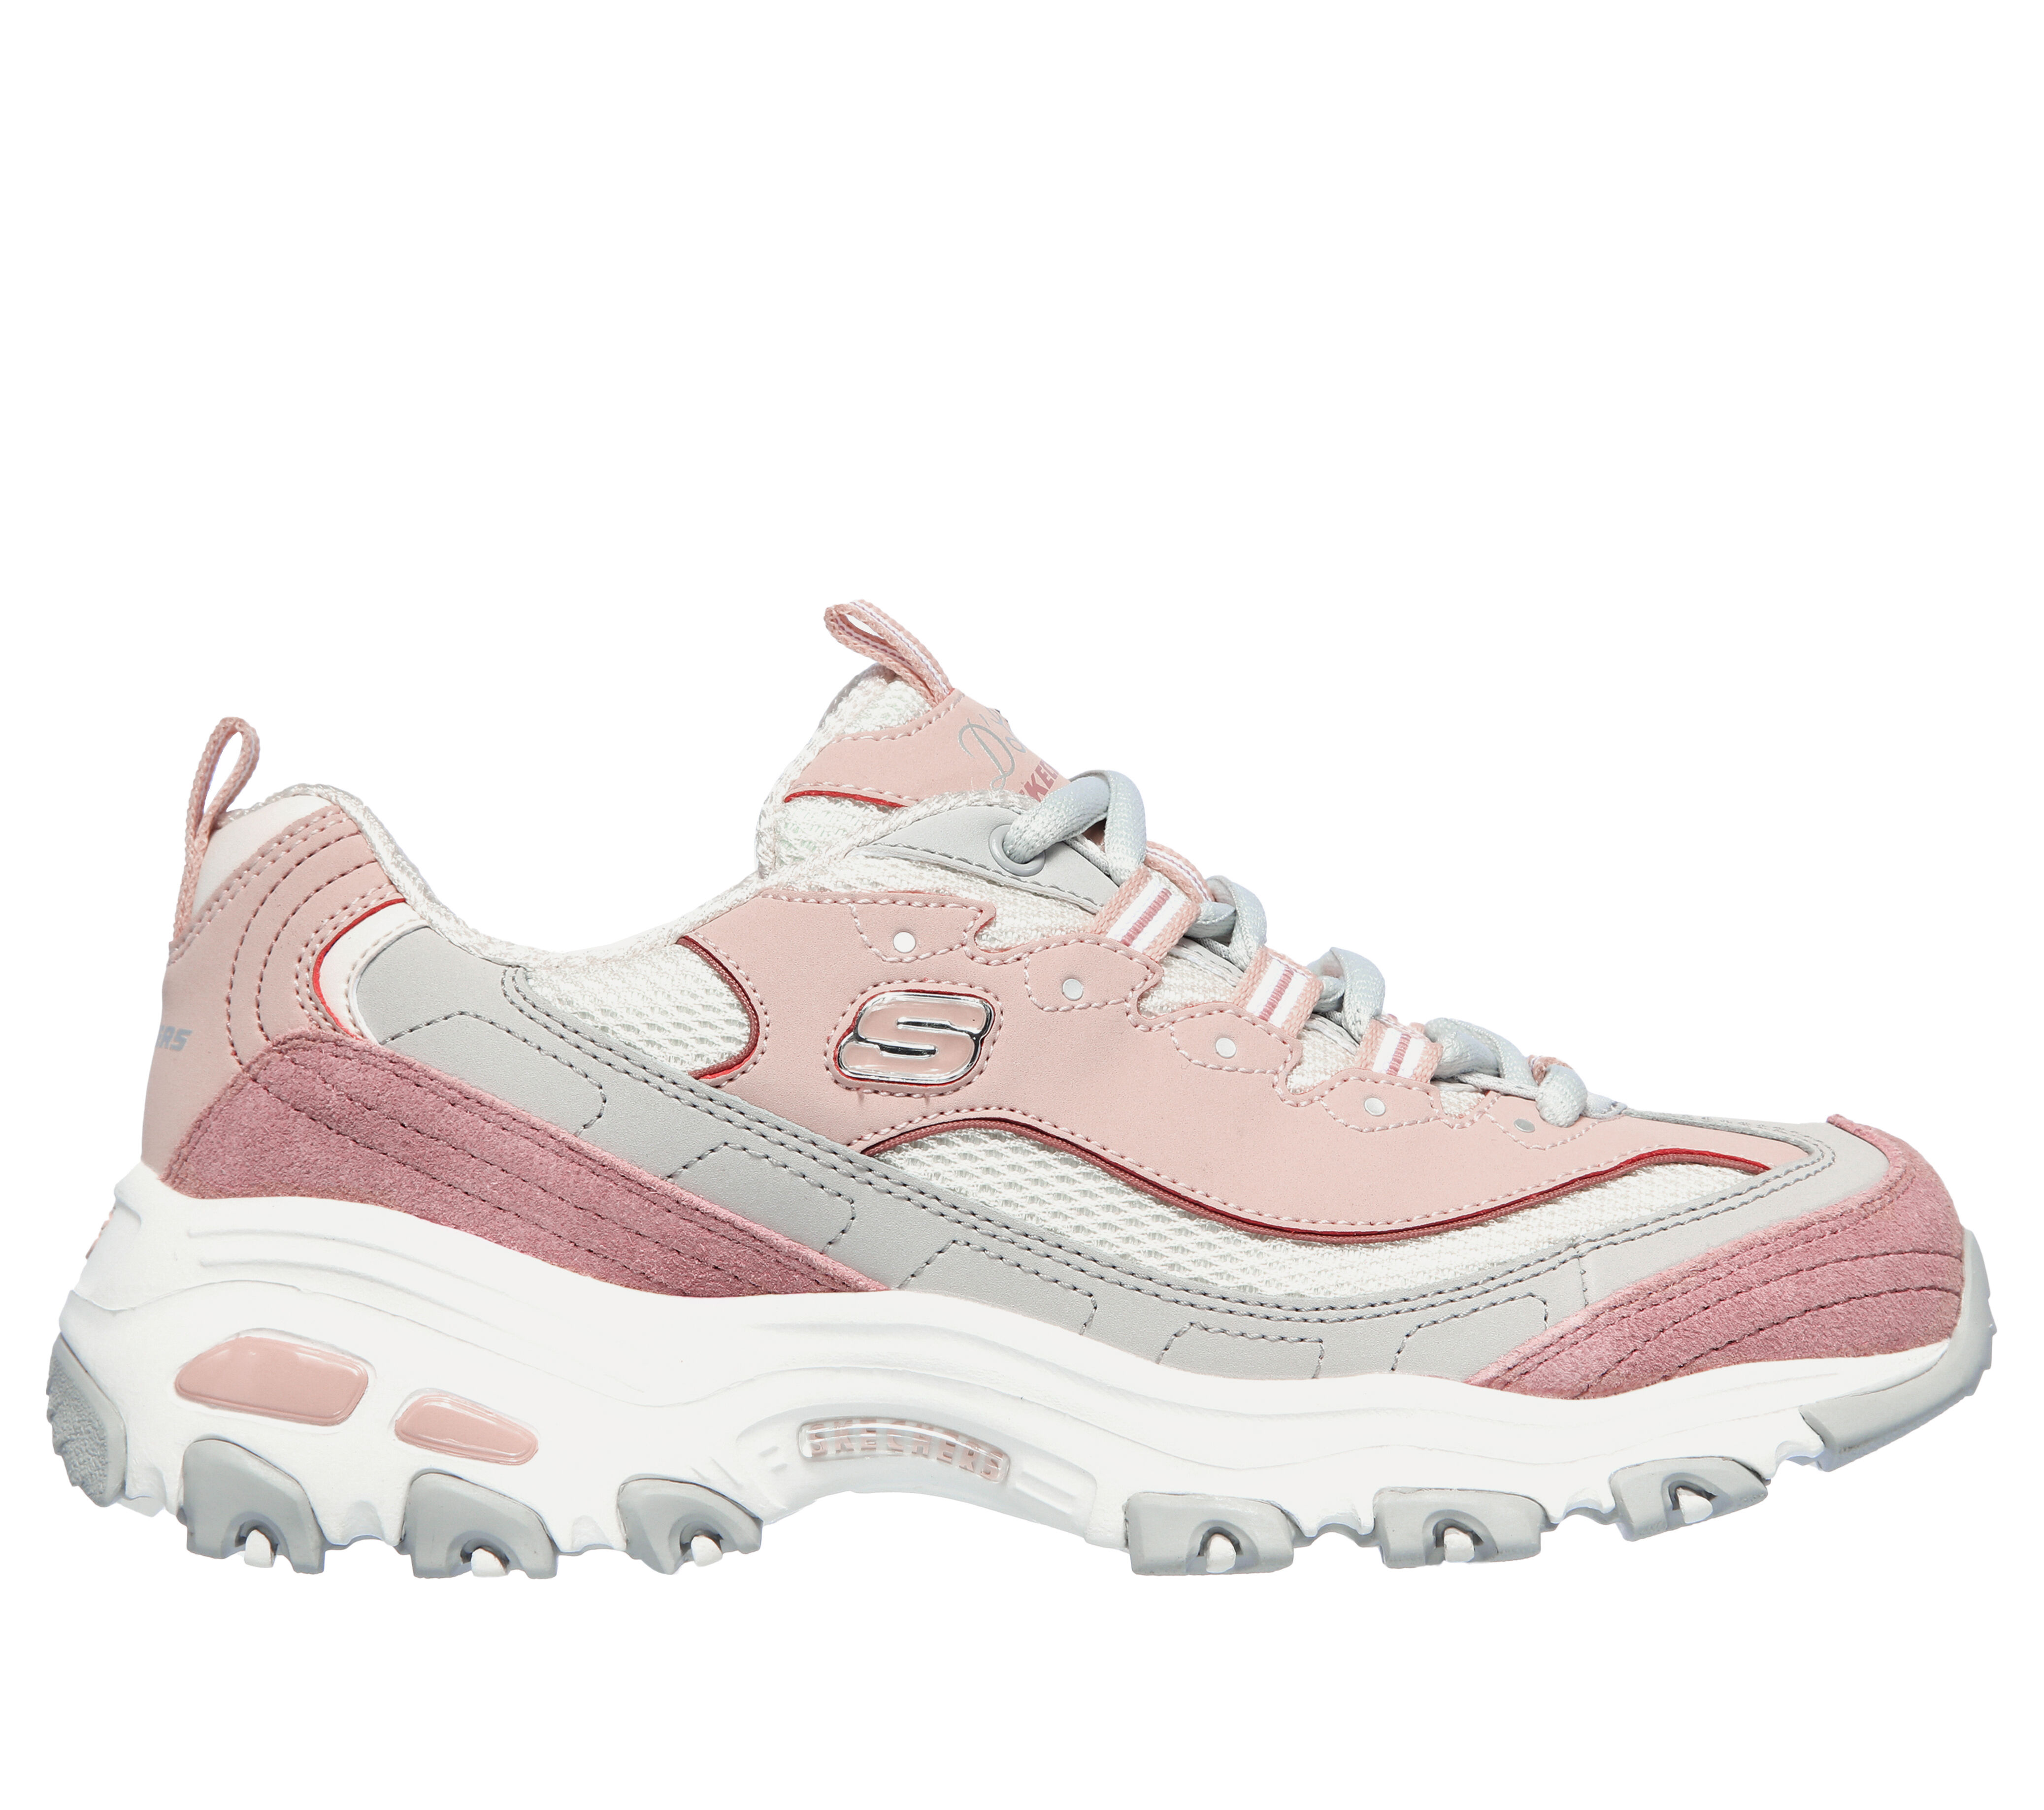 what are the new skechers called